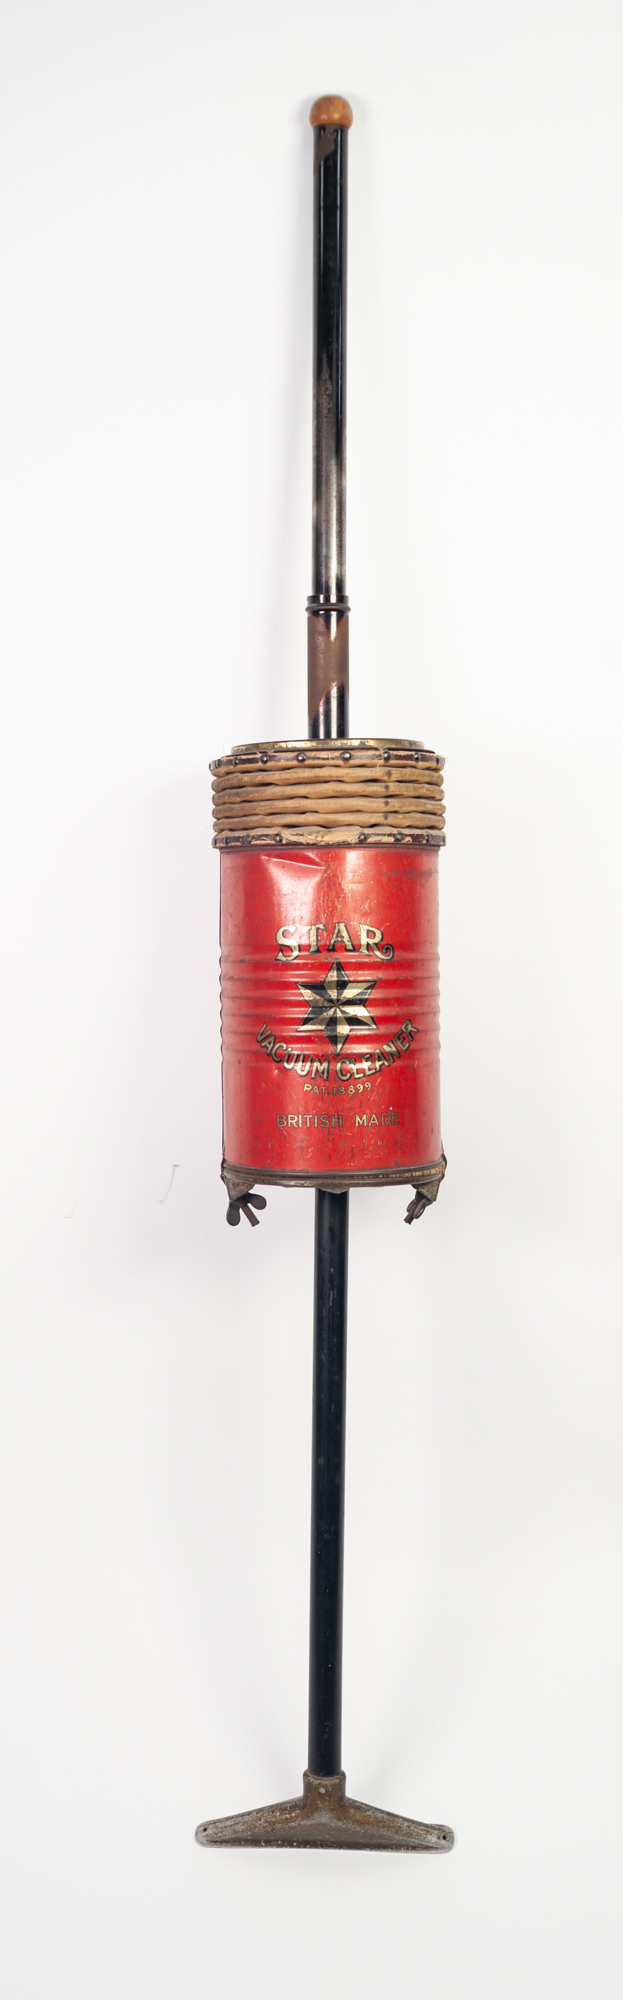 BYGONE HAND OPERATED 'STAR' POLE VACUUM CLEANER,